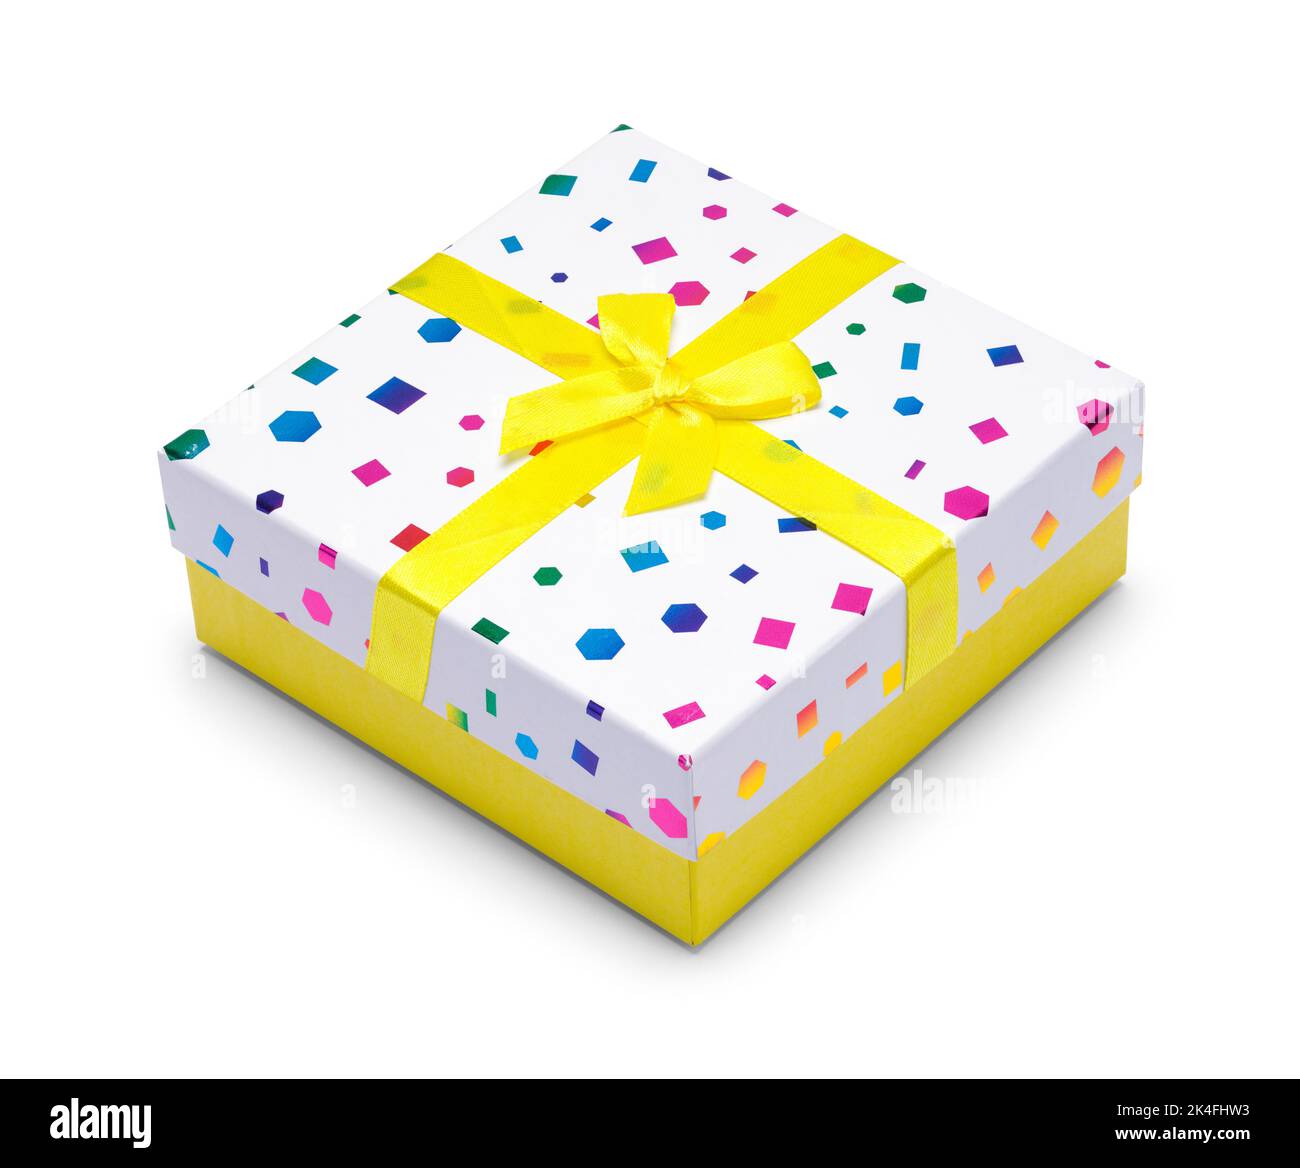 Small Square Yellow Gift Box Cut Out. Stock Photo